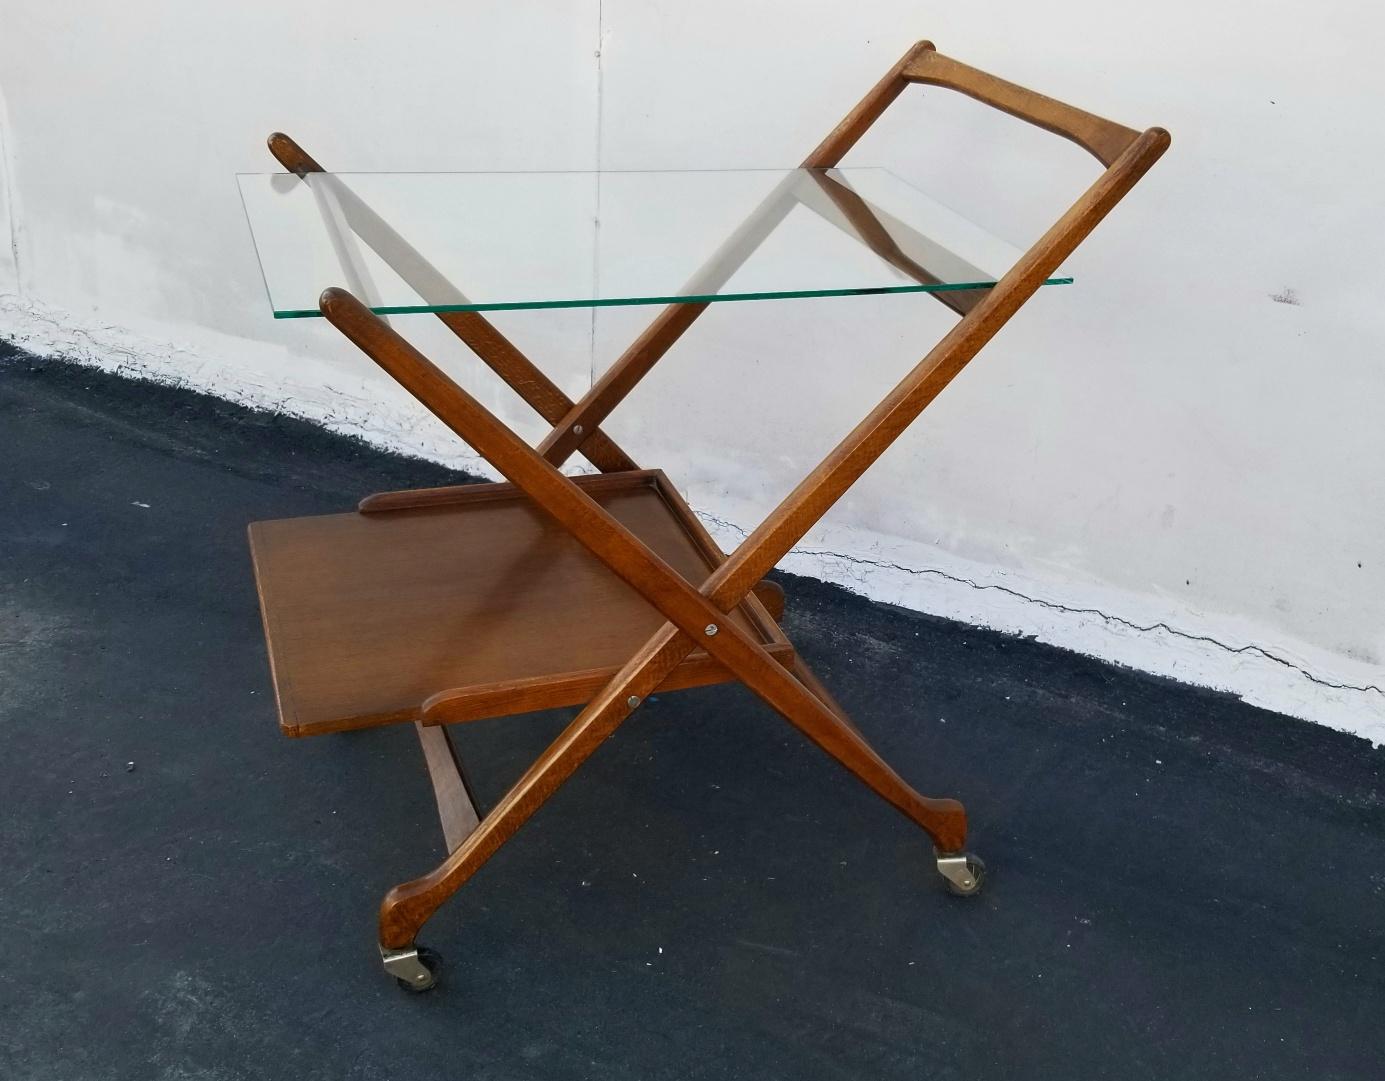 Italian midcentury folding bar cart by Fratelli Reguitti.
Folded dimension: H 41, W 14, D 5 inches.